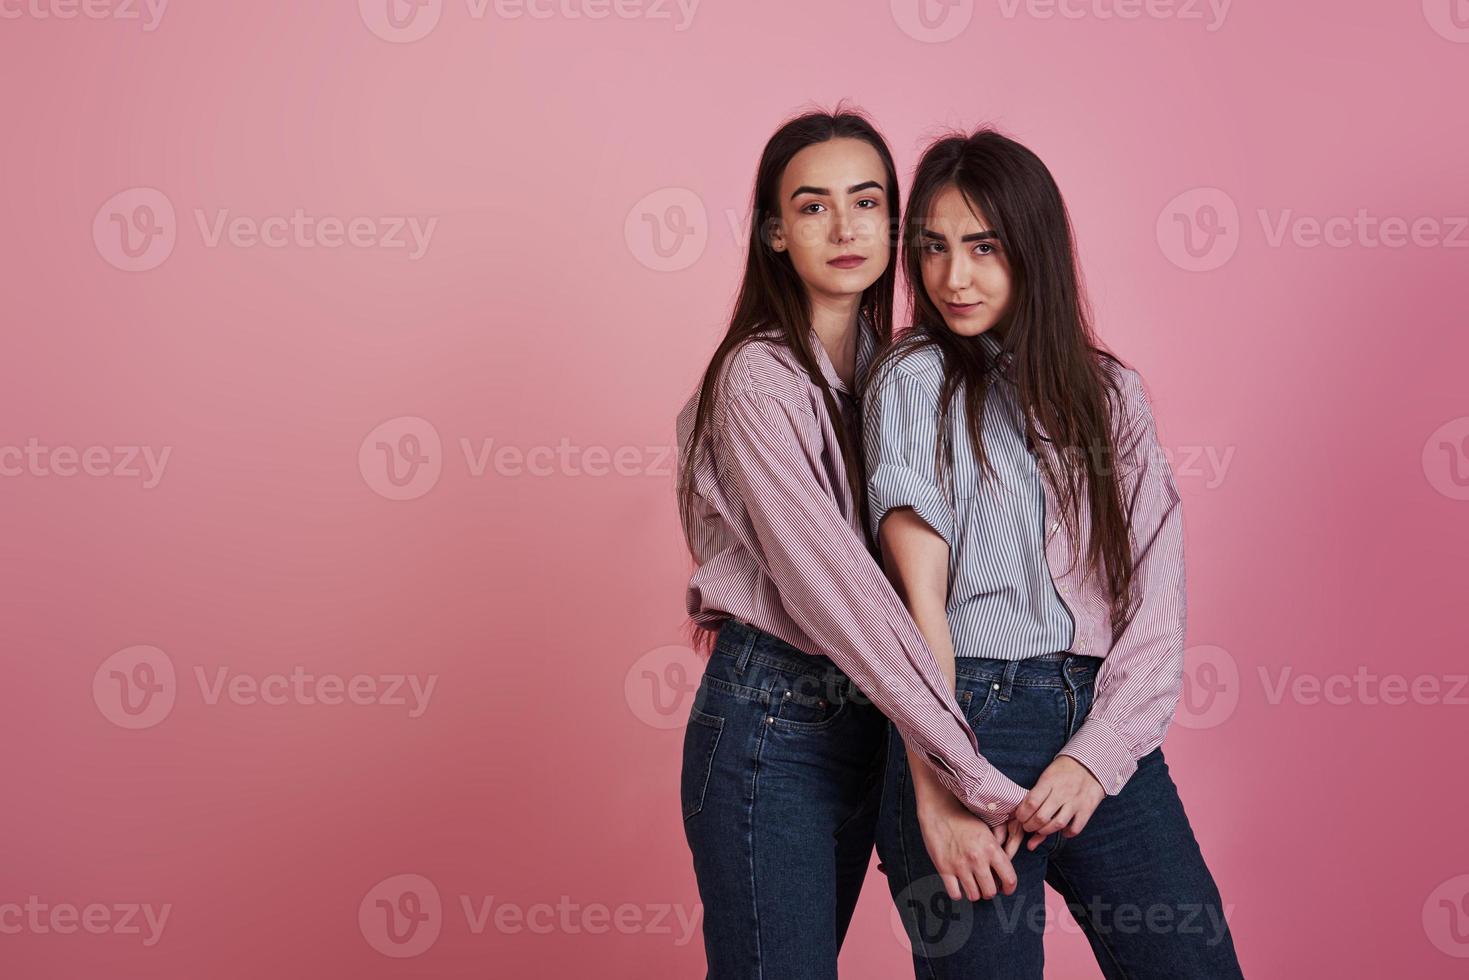 Young women having fun in the studio with pink background. Adorable twins photo